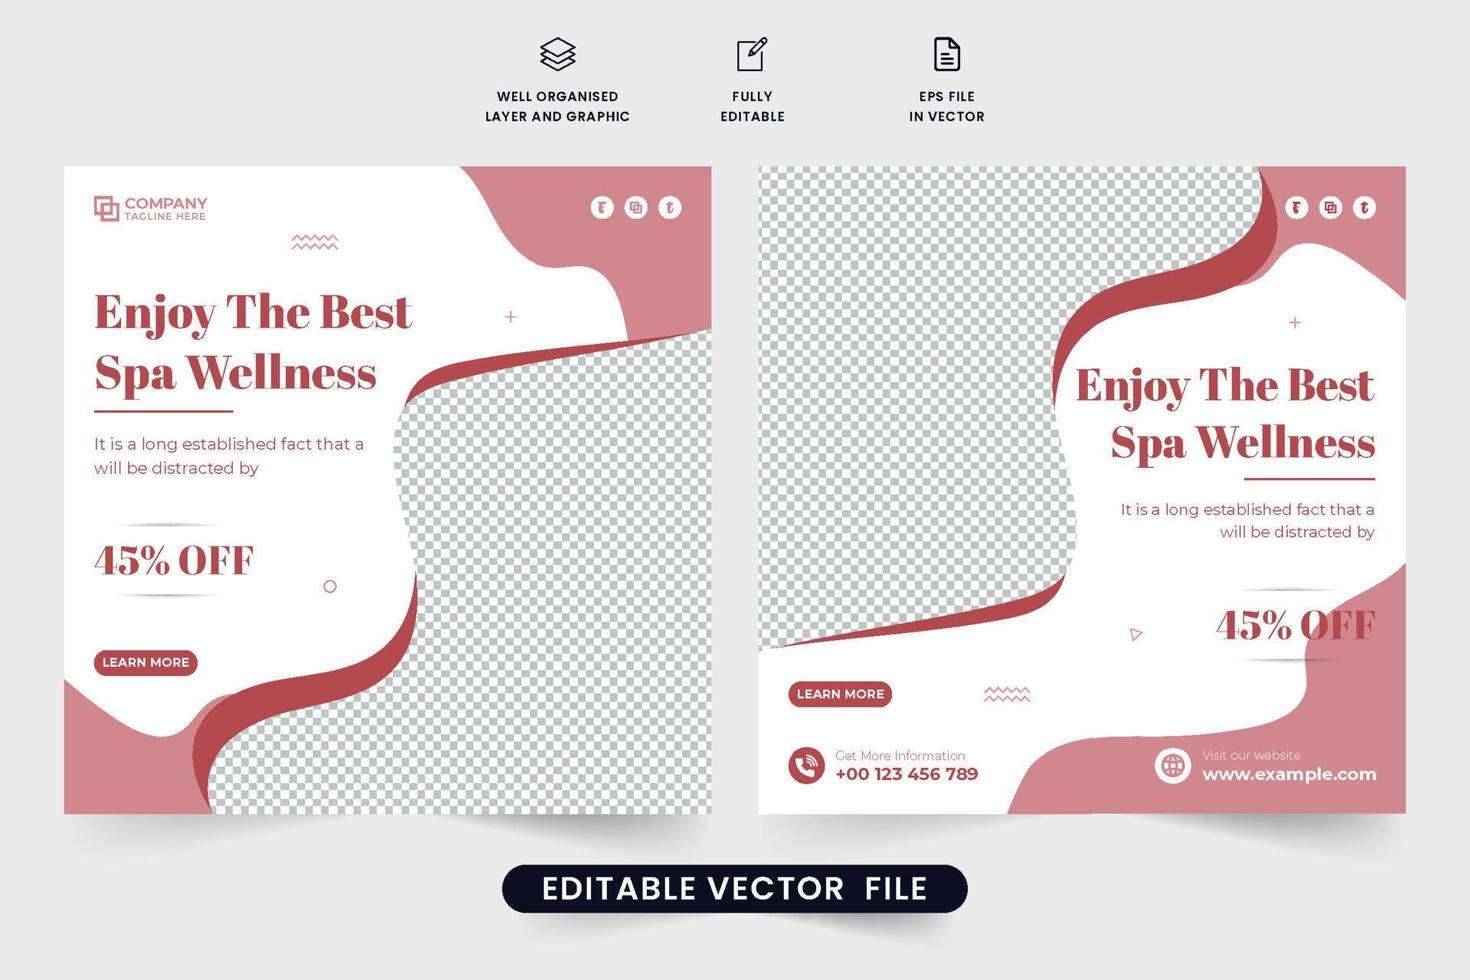 Body massage and beauty treatment template design with photo placeholders. Special spa therapy promotional poster vector with rusty red colors. Spa center advertisement web banner design for marketing